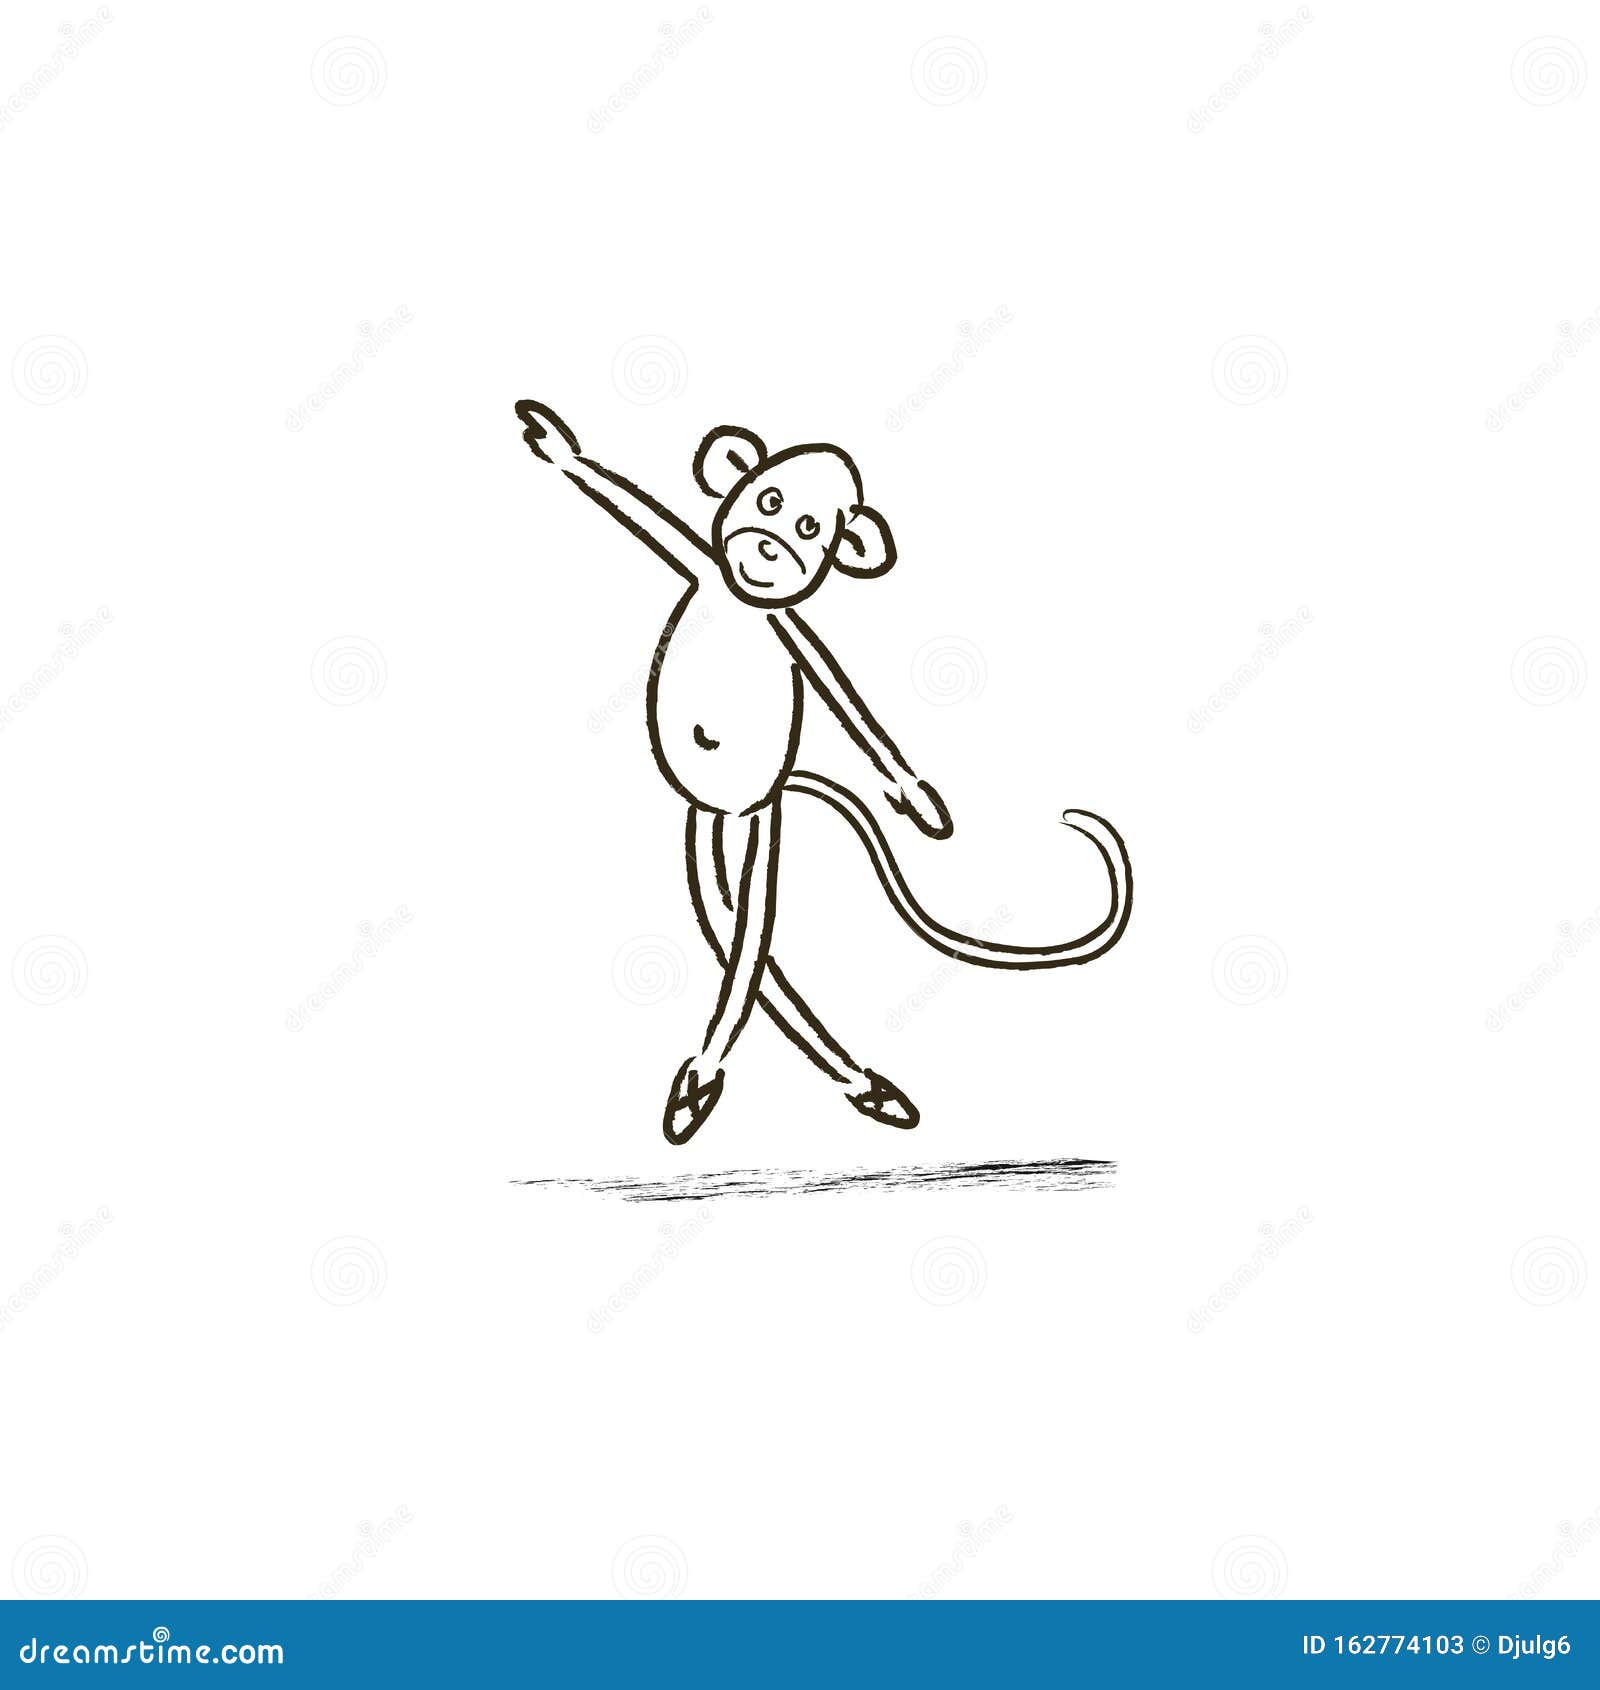 Dancing Monkey Freehand Drawing Isolated On White Background